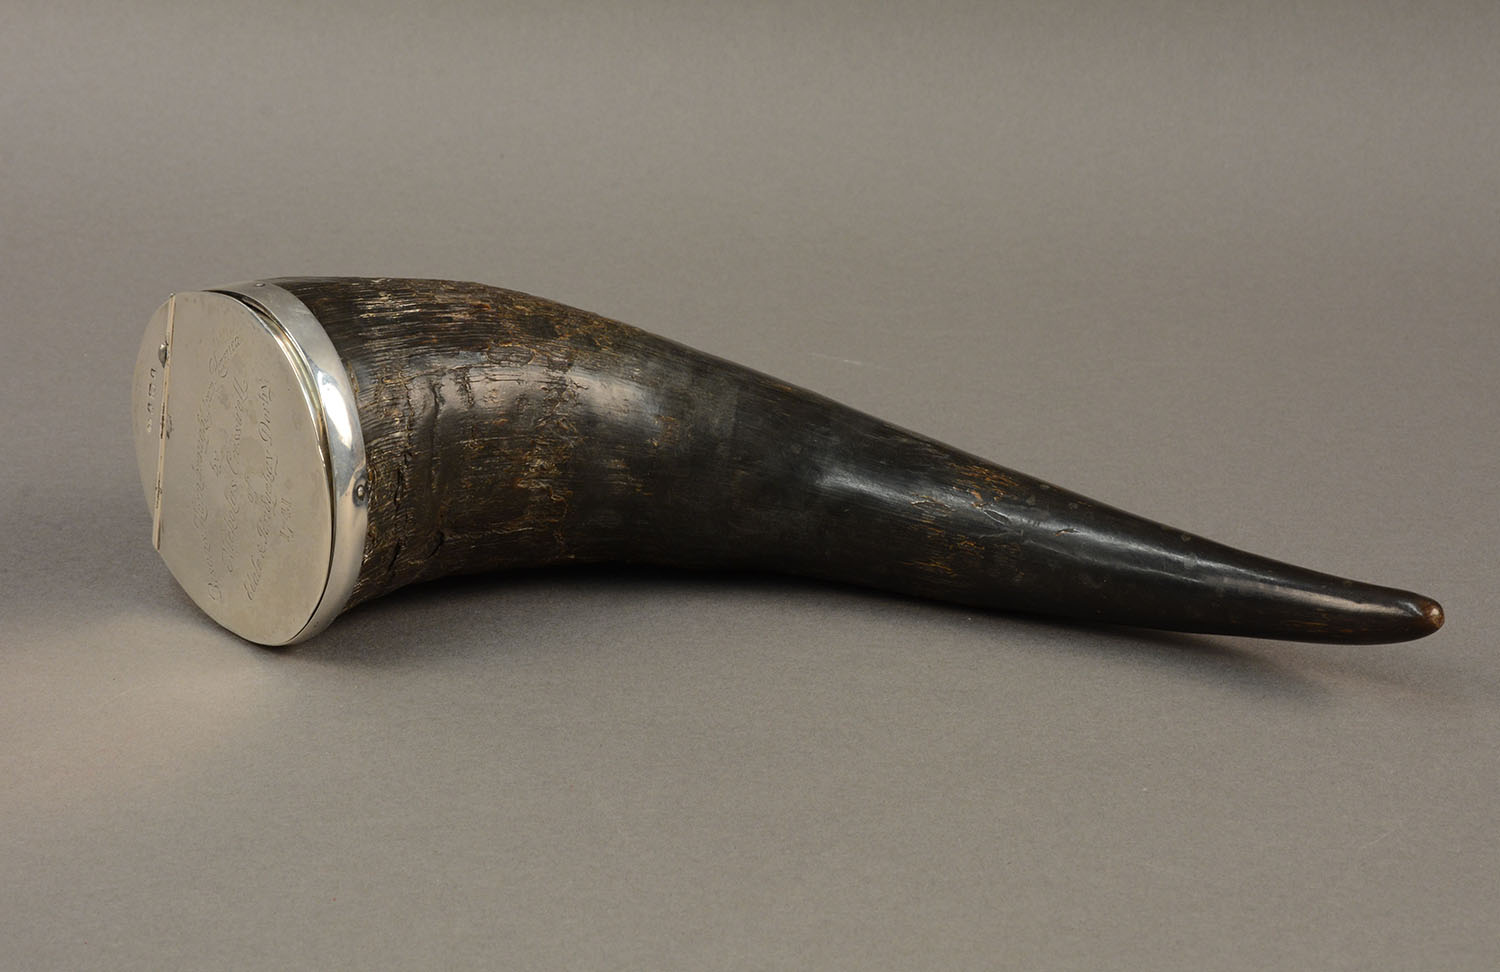 Harvested in the Ohio Country in 1775, this bison horn was carried home by Nicholas Cresswell in 1777. It is on display in the Fort Pitt Museum’s temporary exhibition, Pittsburgh, Virginia, which runs through December 2020.